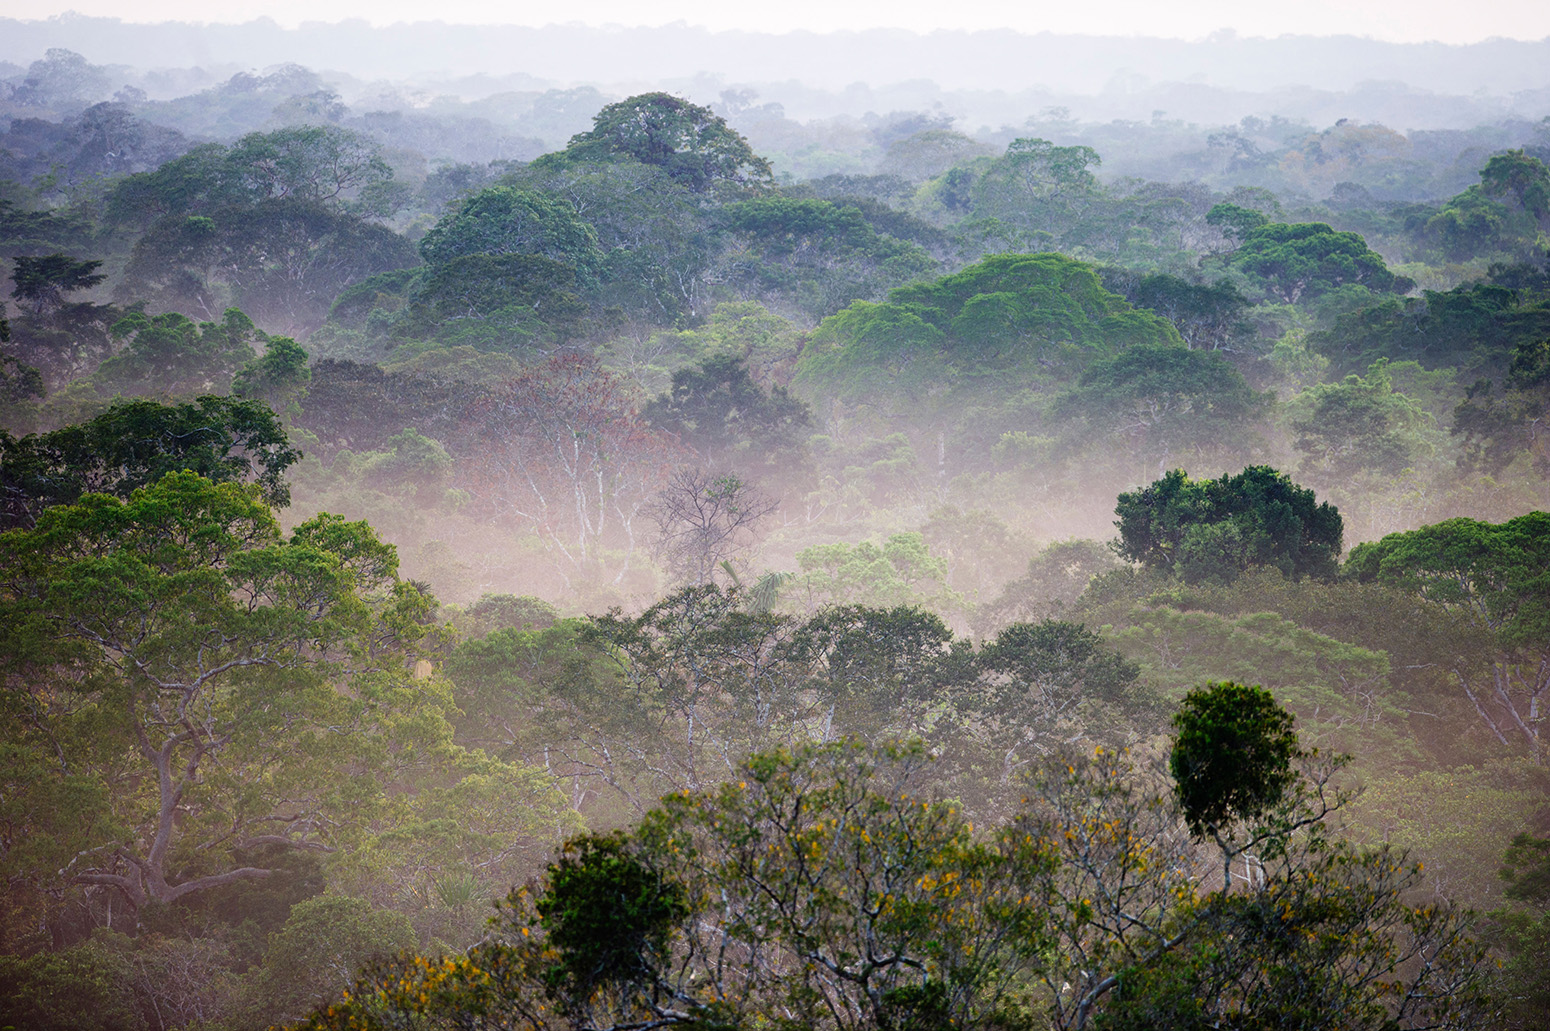 View across canopy of Amazon rainforest with mist at dawn. Credit: David Tipling Photo Library / Alamy Stock Photo. C8XHJF